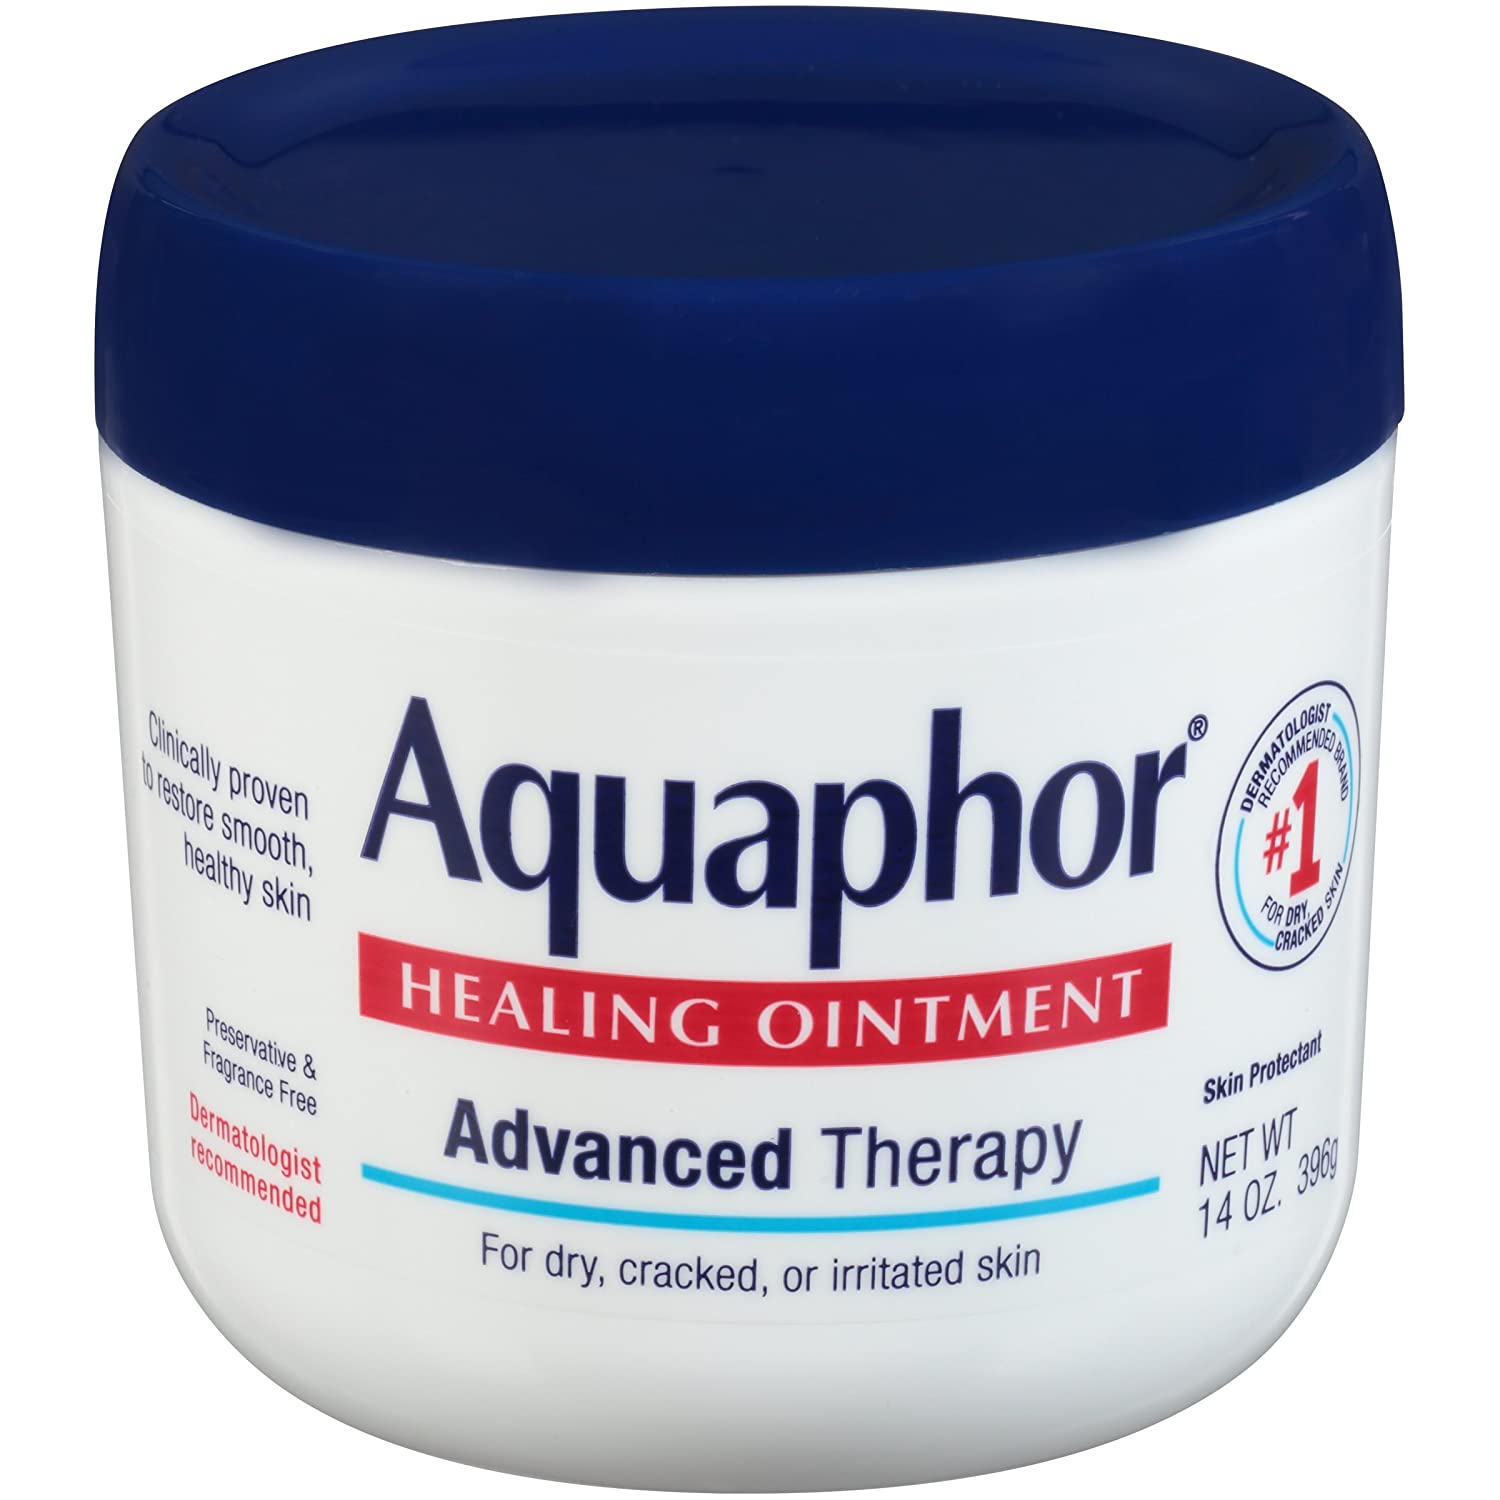 Aquaphor Healing Ointment - Moisturizing Skin Protectant for Dry Cracked Hands, Heels and Elbows, Use After Hand Washing - 14 oz. Jar - image 1 of 4